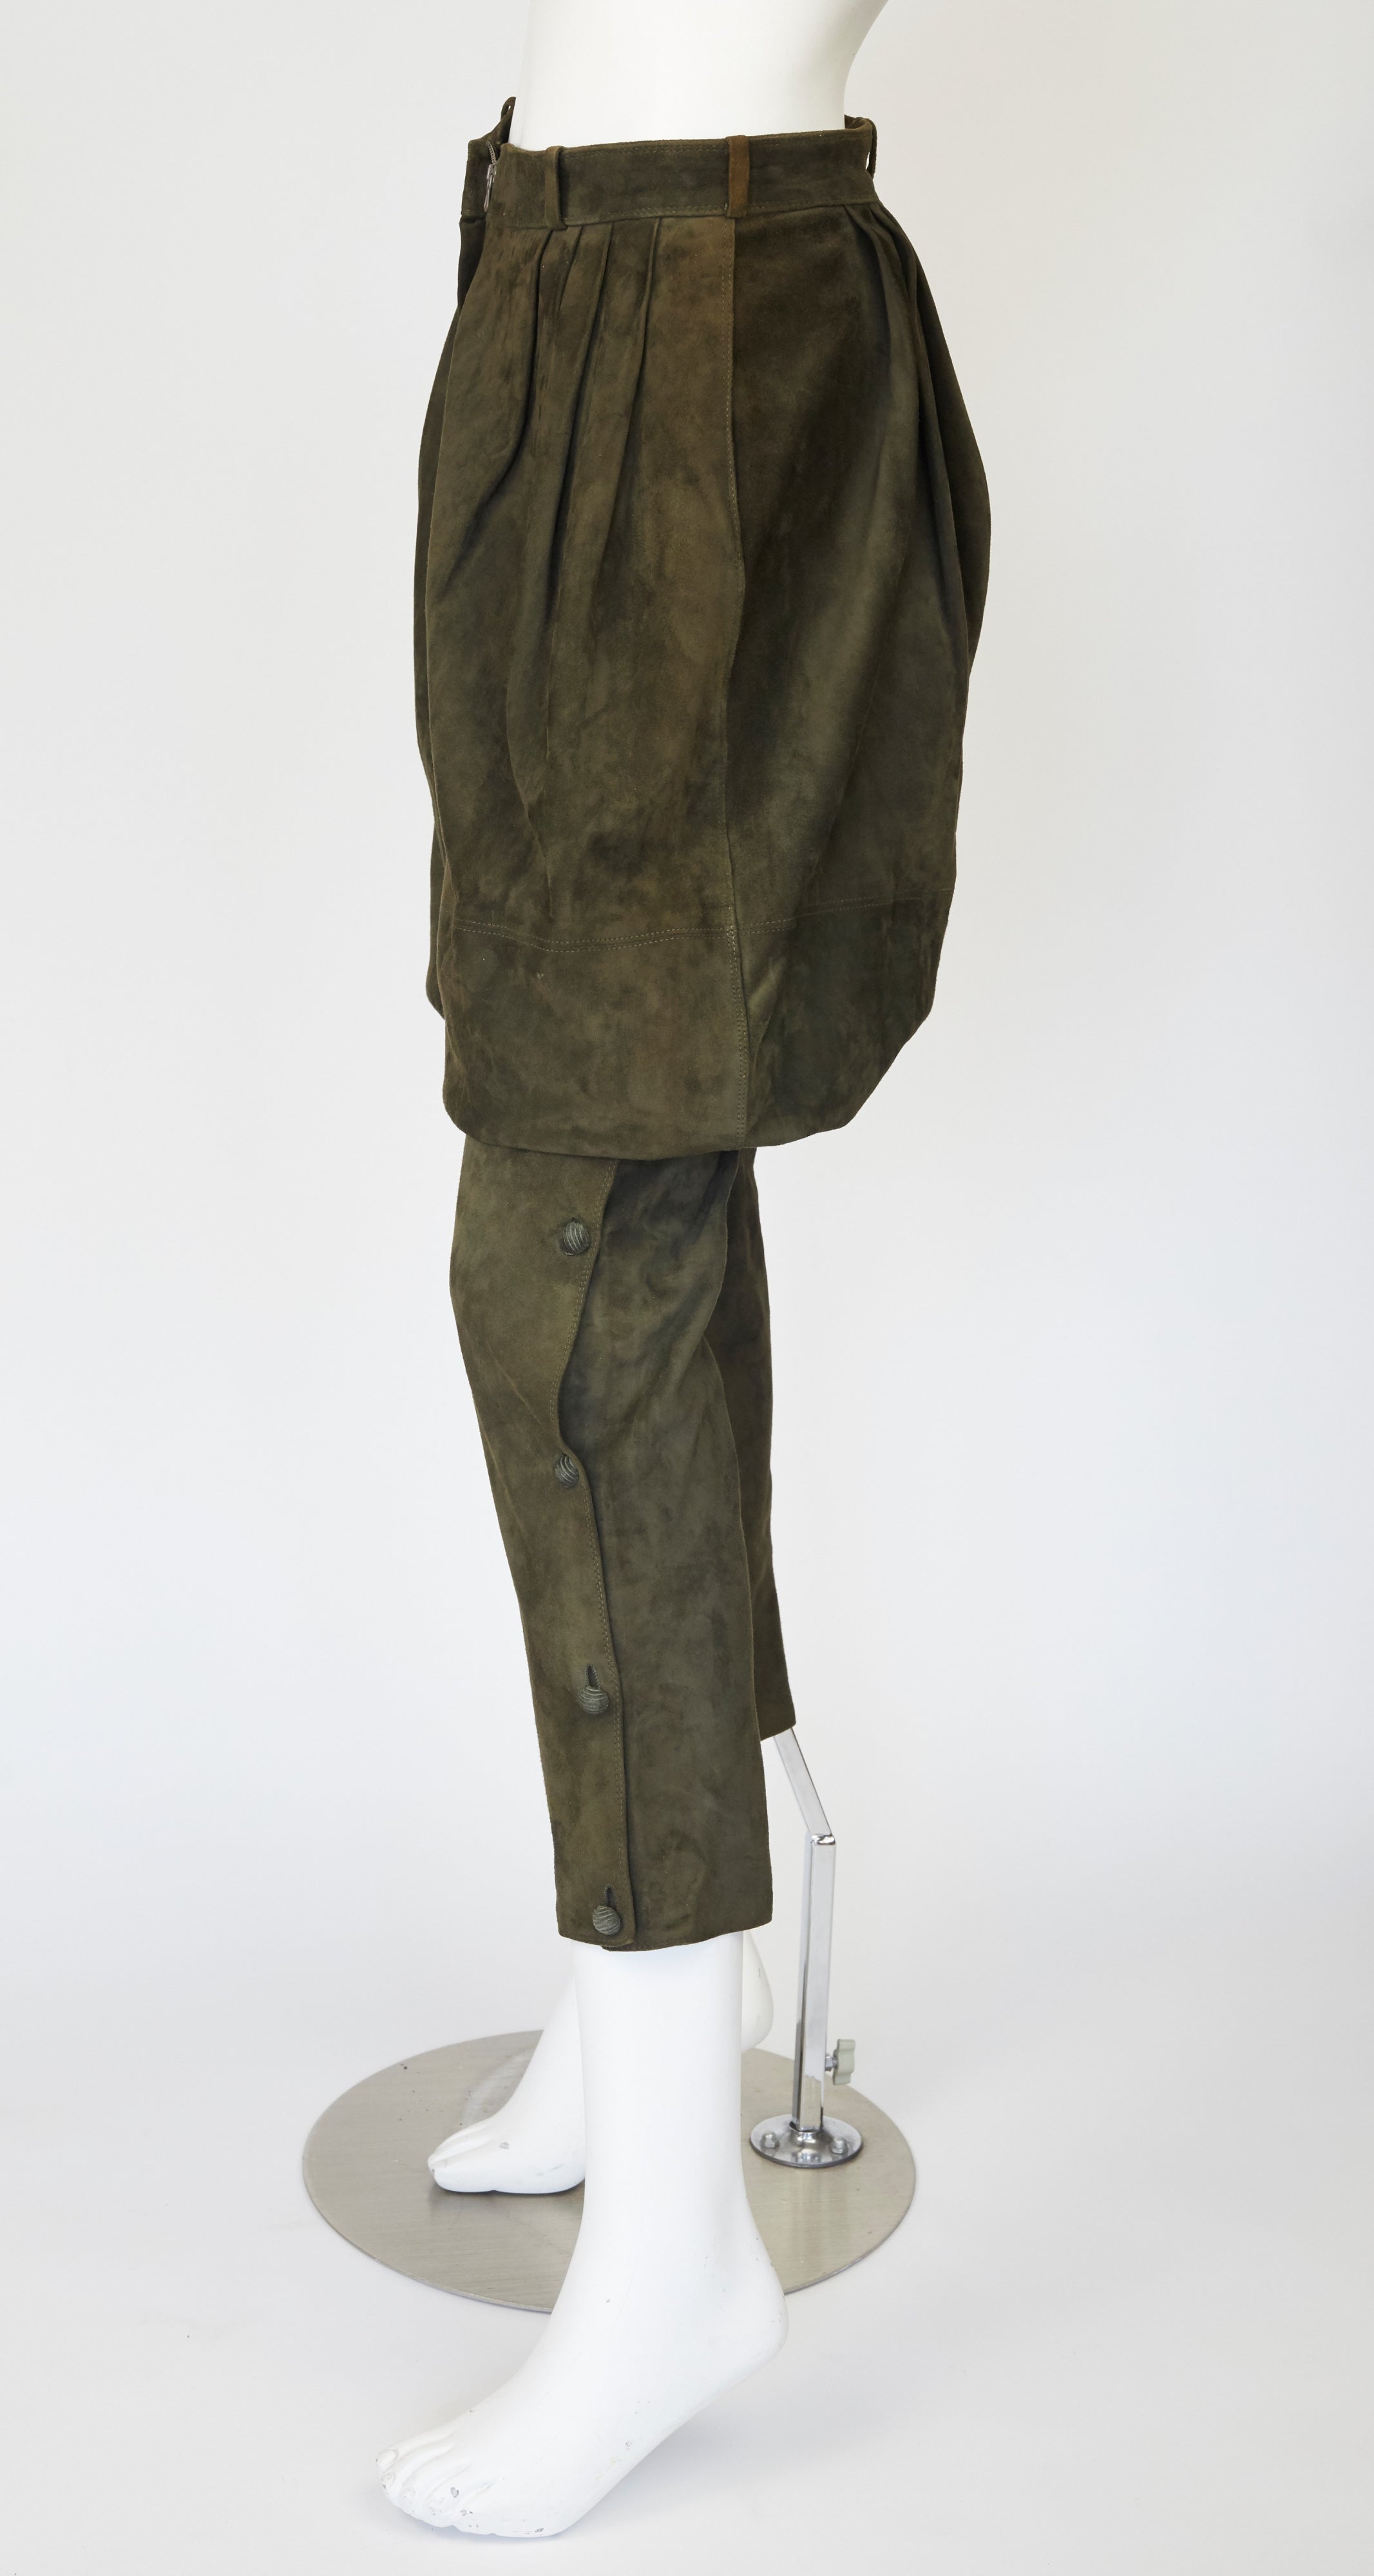 1981 Olive Green Suede & Corduroy Balloon Pants